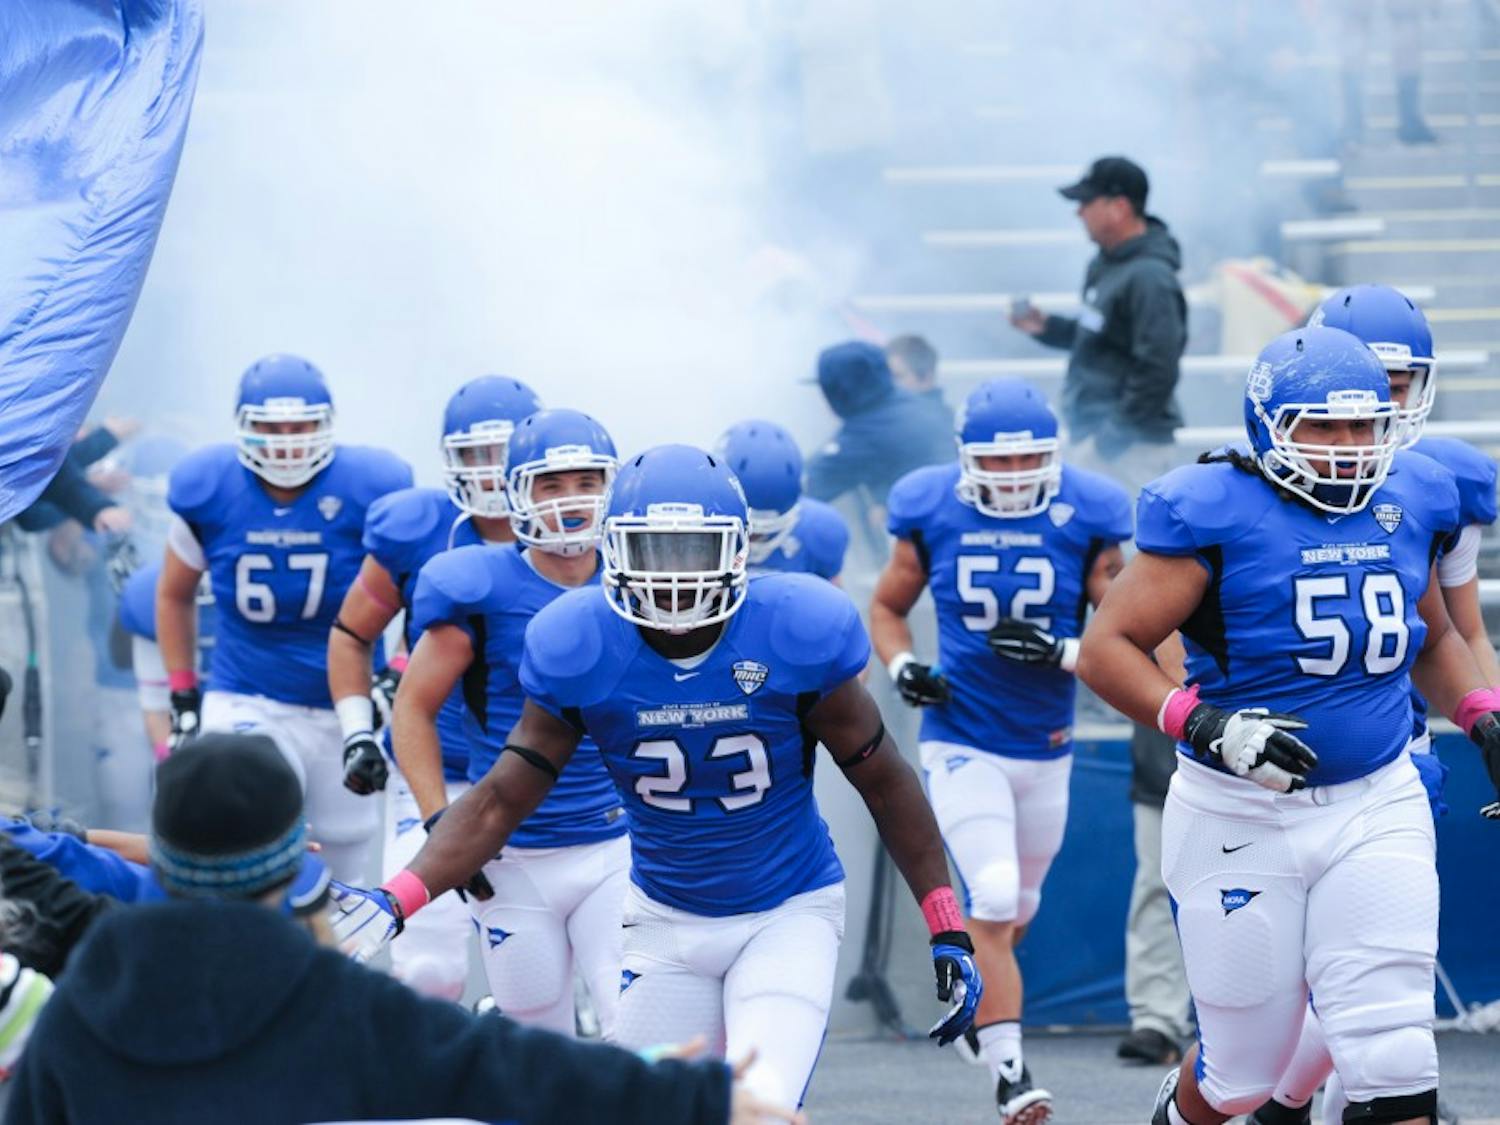 The UB football team runs out of the tunnel of the UB Stadium. The gap between the schools in the Power Five conferences and Mid-Majors like UB seems to be widening, raising the question if it is worth is for schools to have Division I football teams outside of the Power Five.